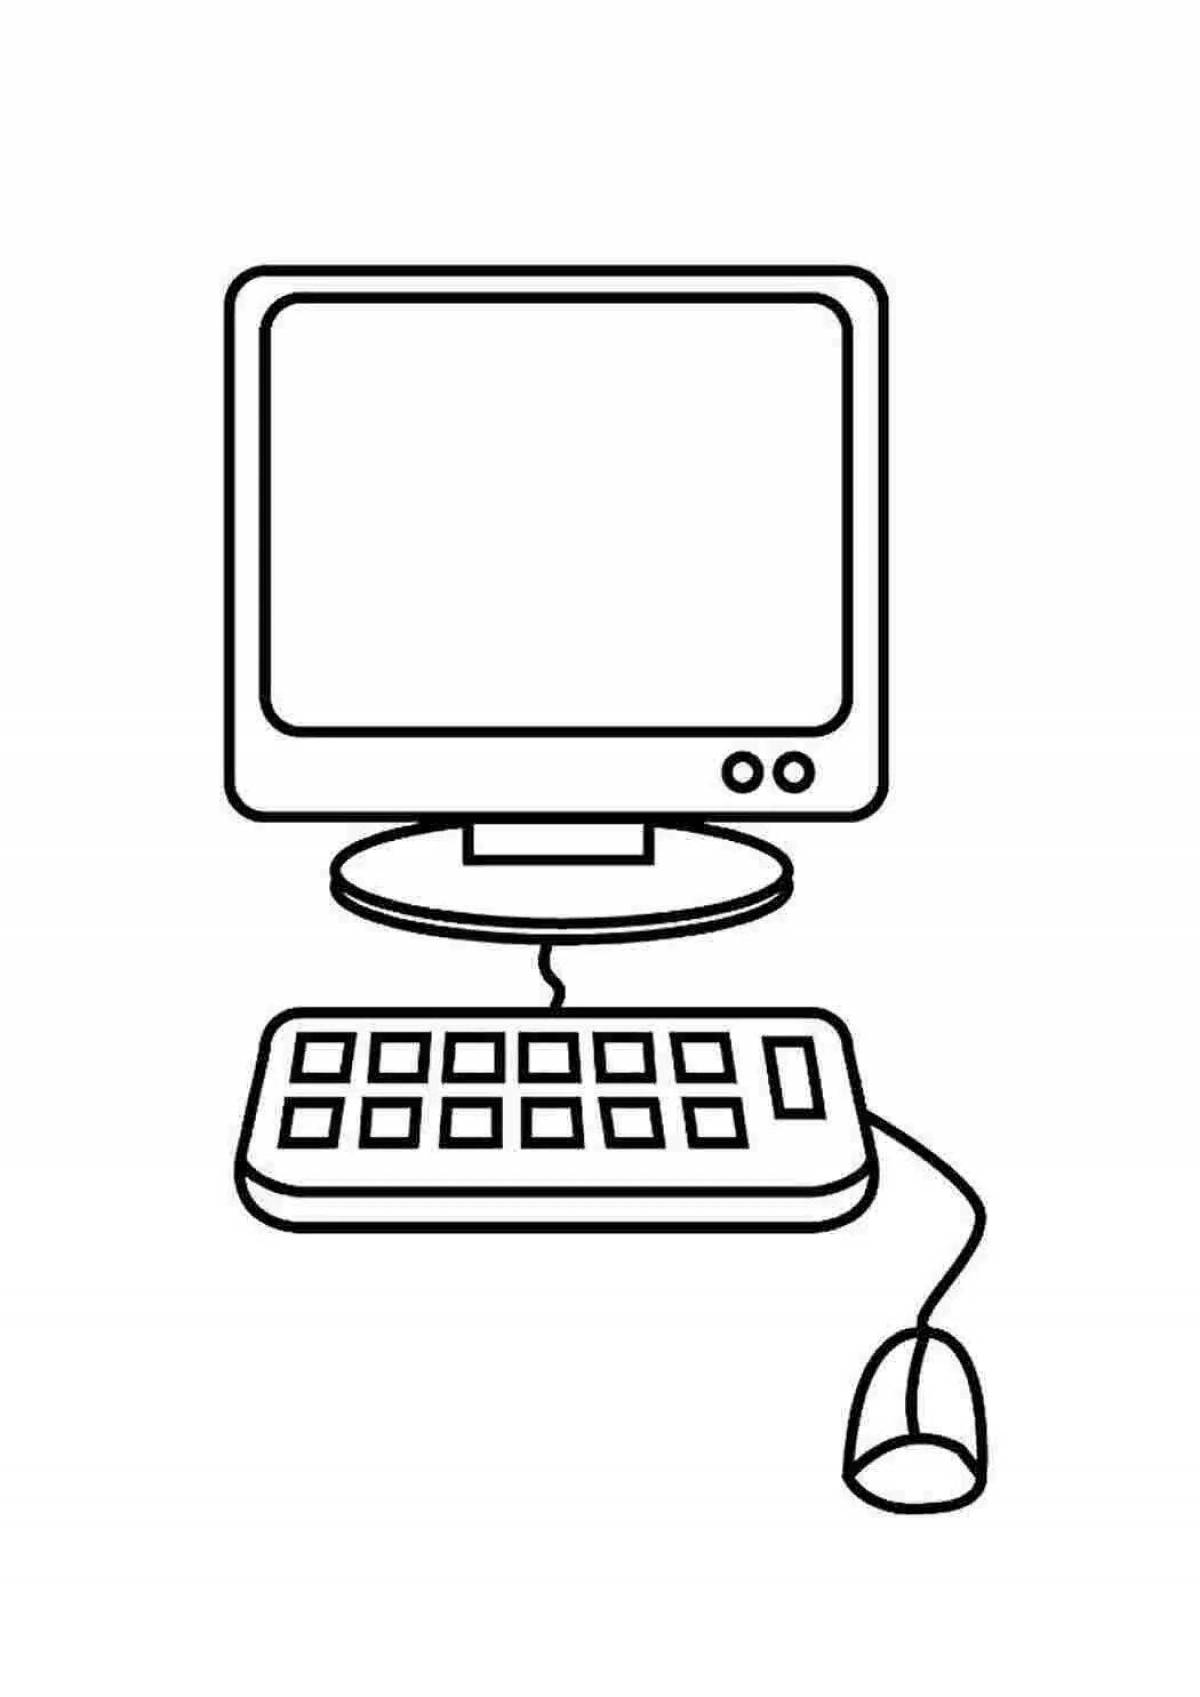 Computer science coloring page color oriented